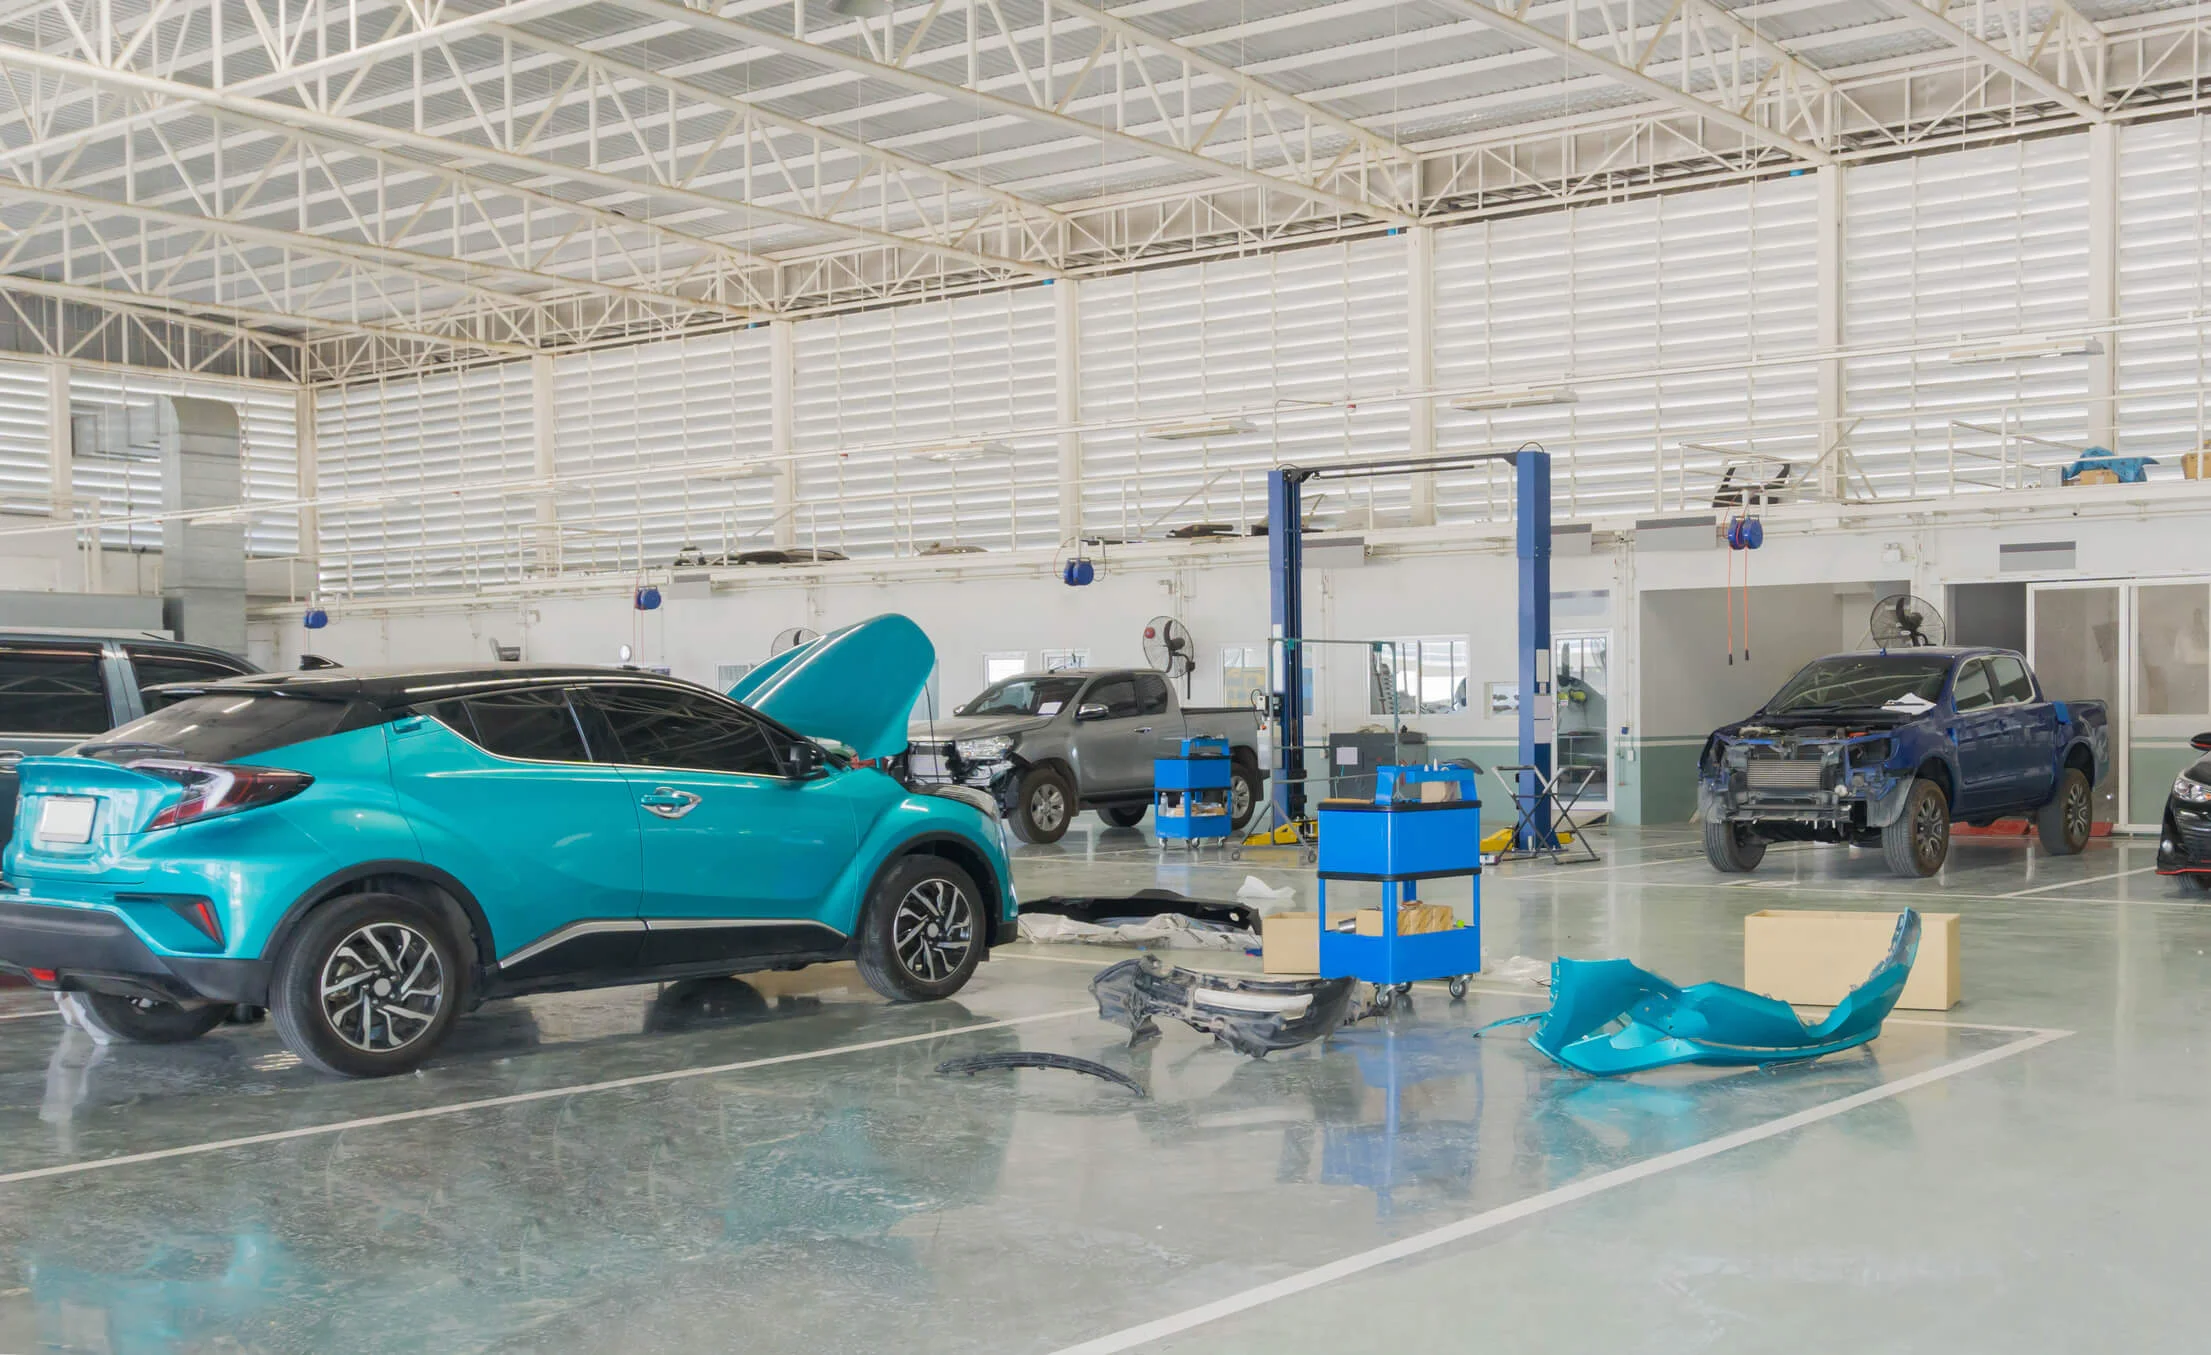 An auto repair facility with cars being repaired and maintained.